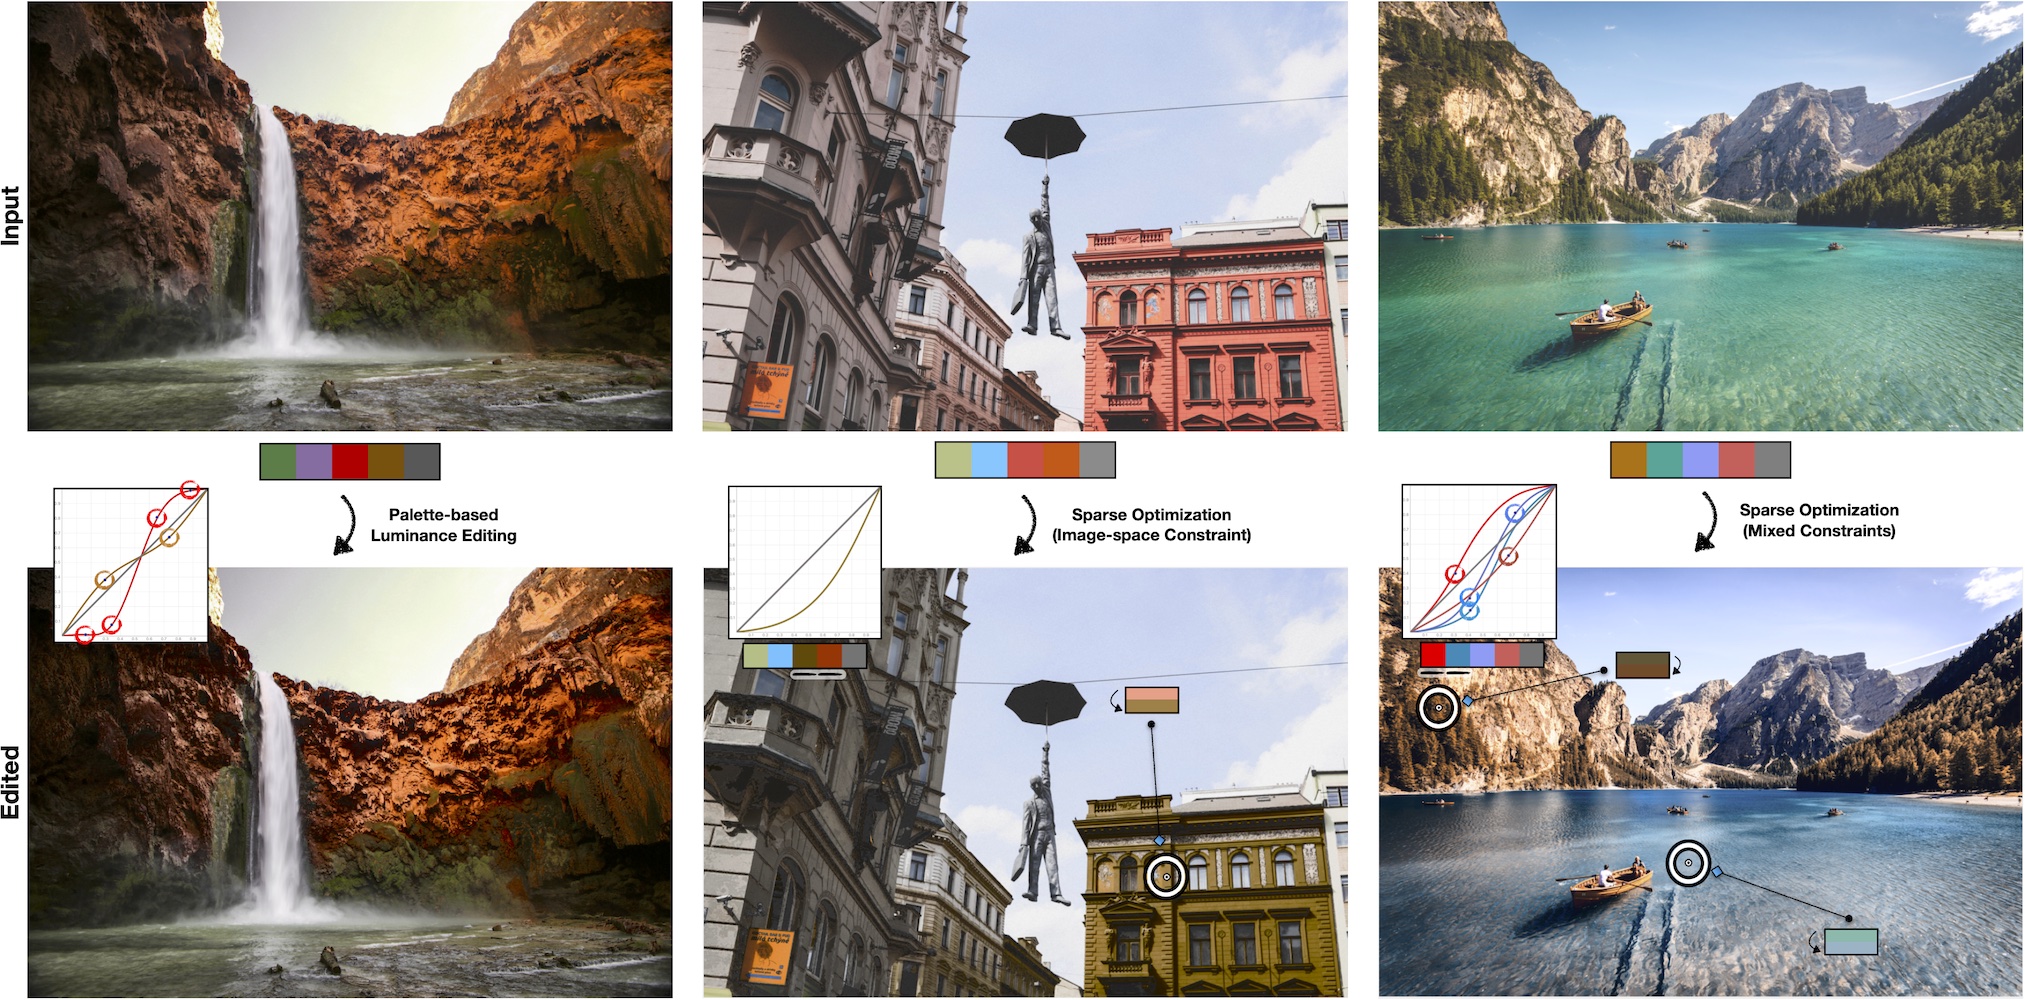 Three example images edited using ColorfulCurves. The first example shows palette-based luminance editing of a photograph of a waterfall over red cliffs. The user has placed constraints on the tone curves for some of the palettes to enhance constrast for some of the colors. The second example shows sparse optimization using image-space constraints. The photograph is of a city with sky, a statue of a man holding an umbrella floating in the air, and two buildings. A constraint has been placed on one of the buildings changing its color. The third example shows sparse optimization with mixed constraints. The photograph is of a green lake surrounding by mountains with people in canoes. A constraint has been placed on the water to turn it blue. A constraint has been placed on the trees to turn them red. Some constraints have been placed on the tone curves to enhance constrast for some of the colors.